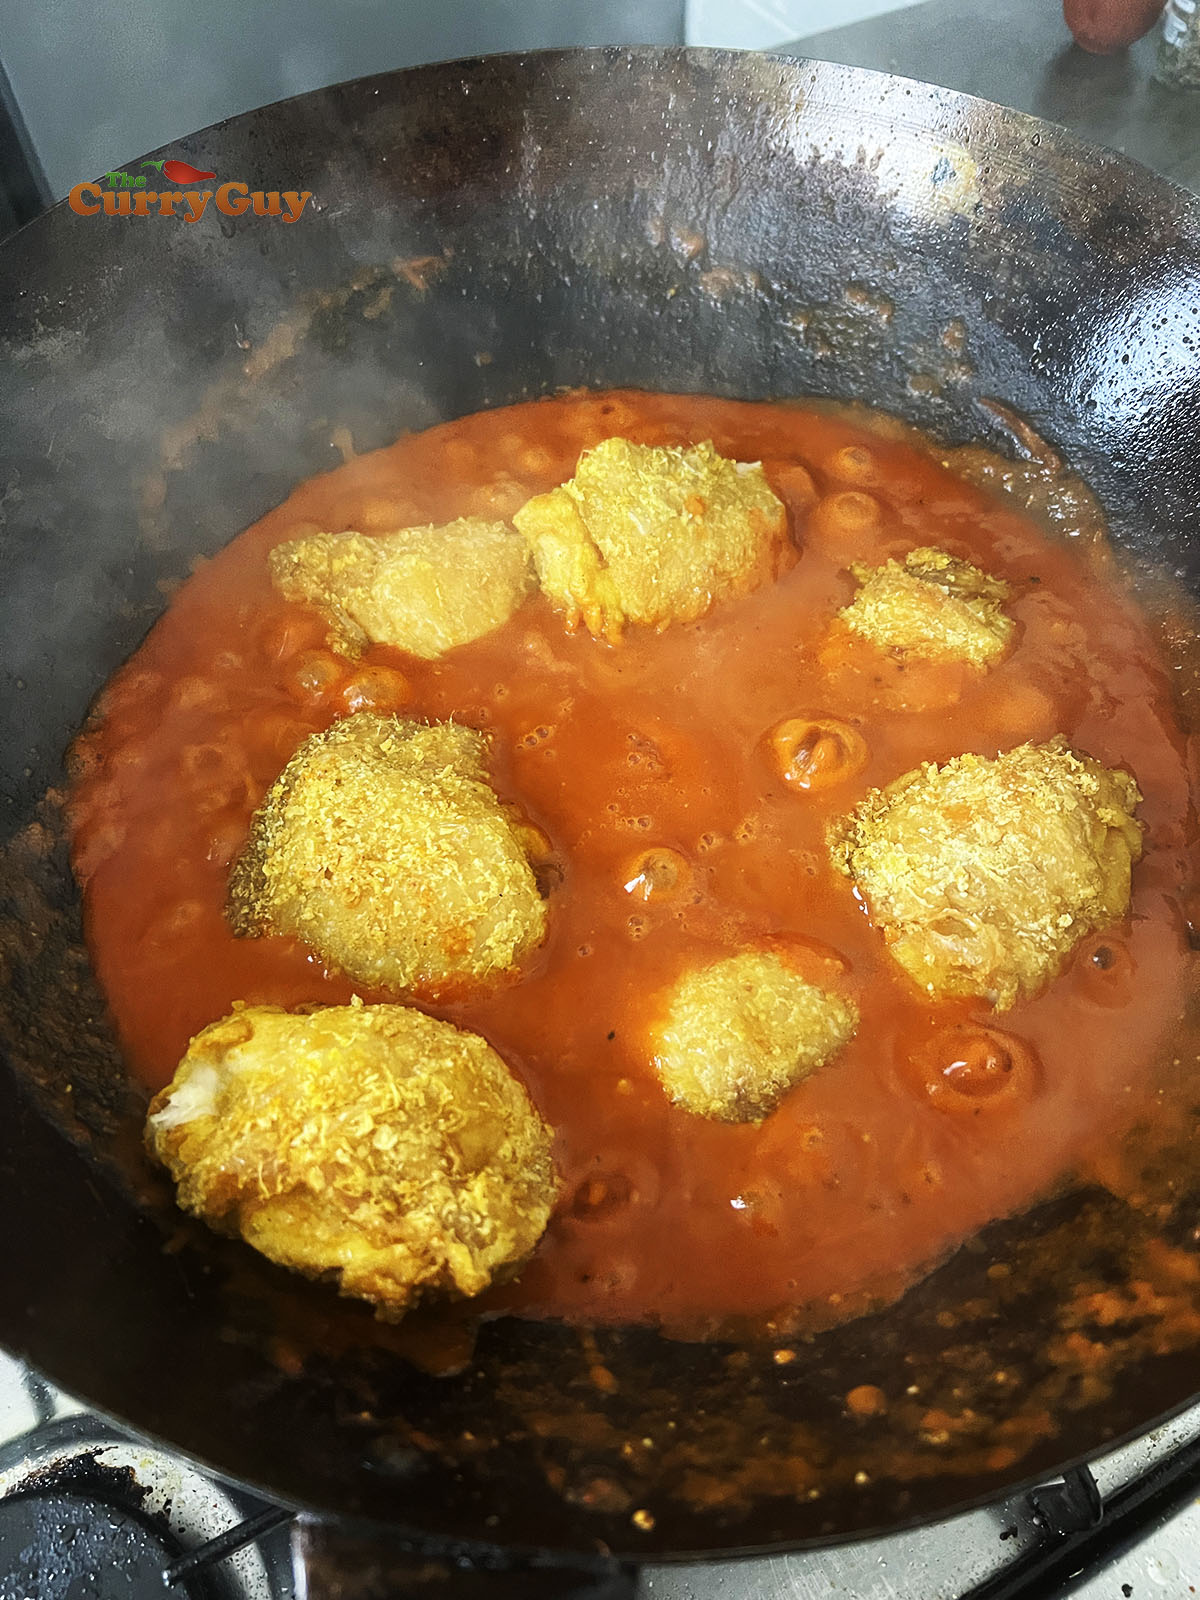 Adding chicken to the wok and sauce